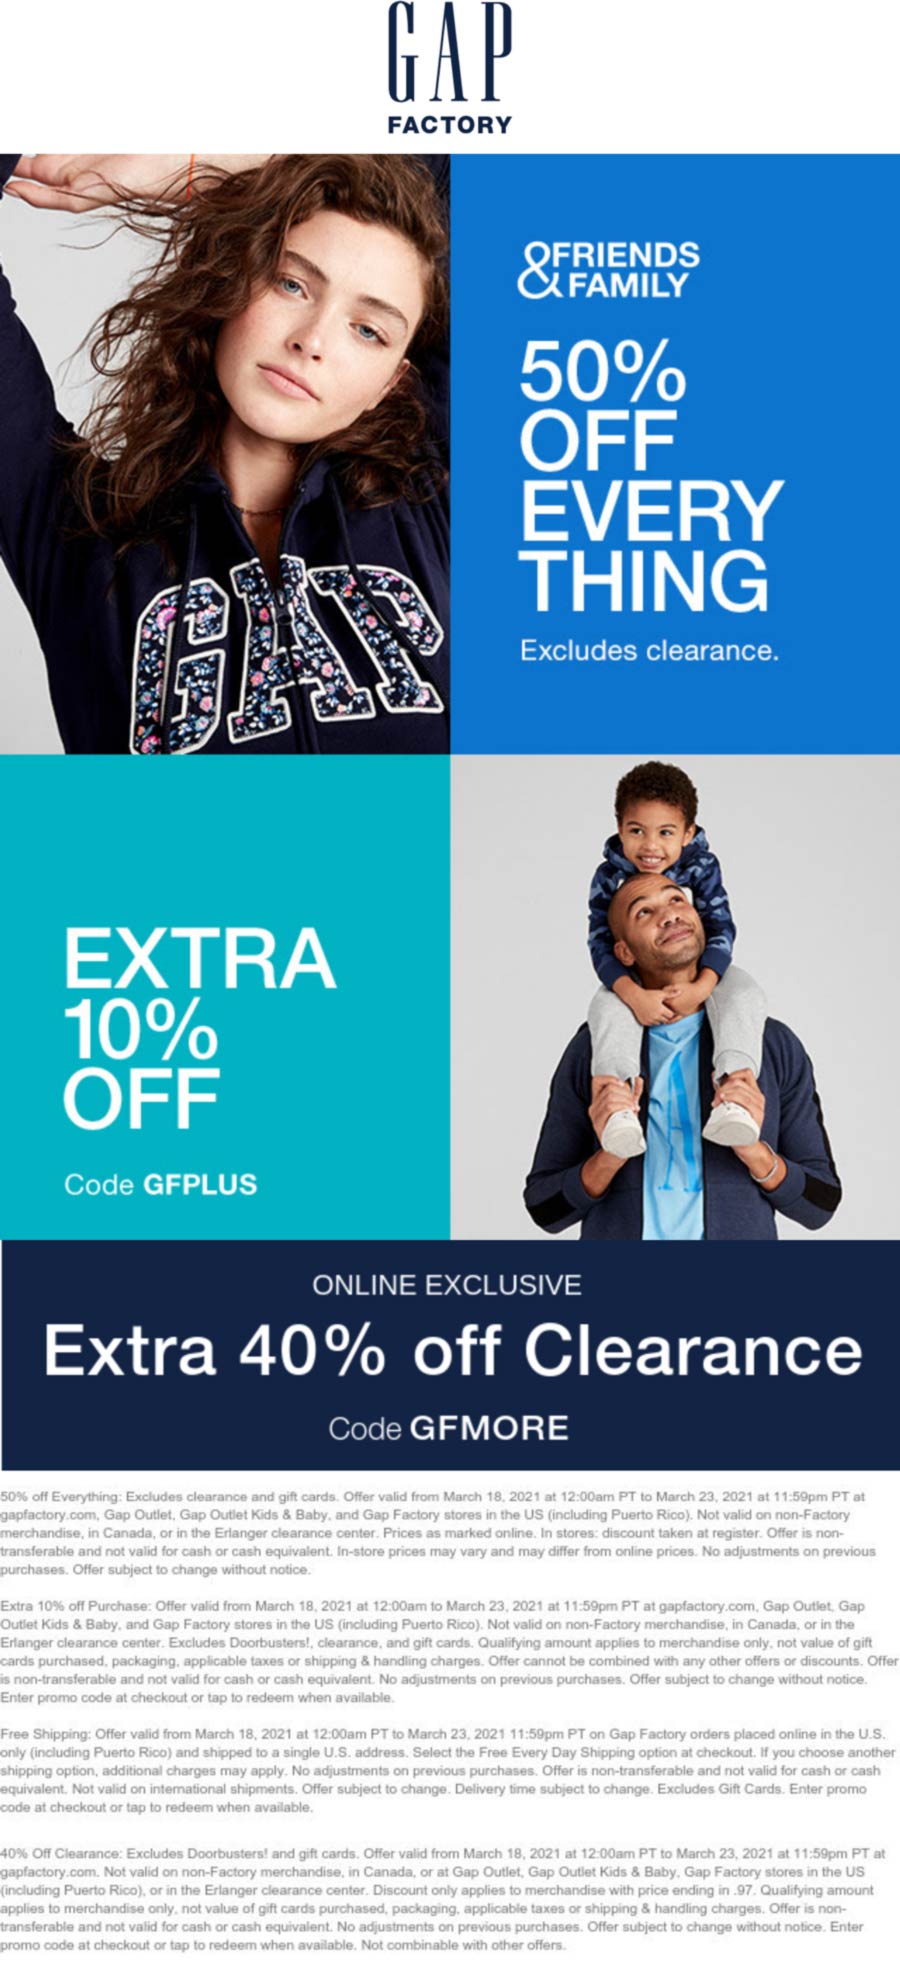 60 off everything at Gap Factory, or online via promo code GFPLUS 